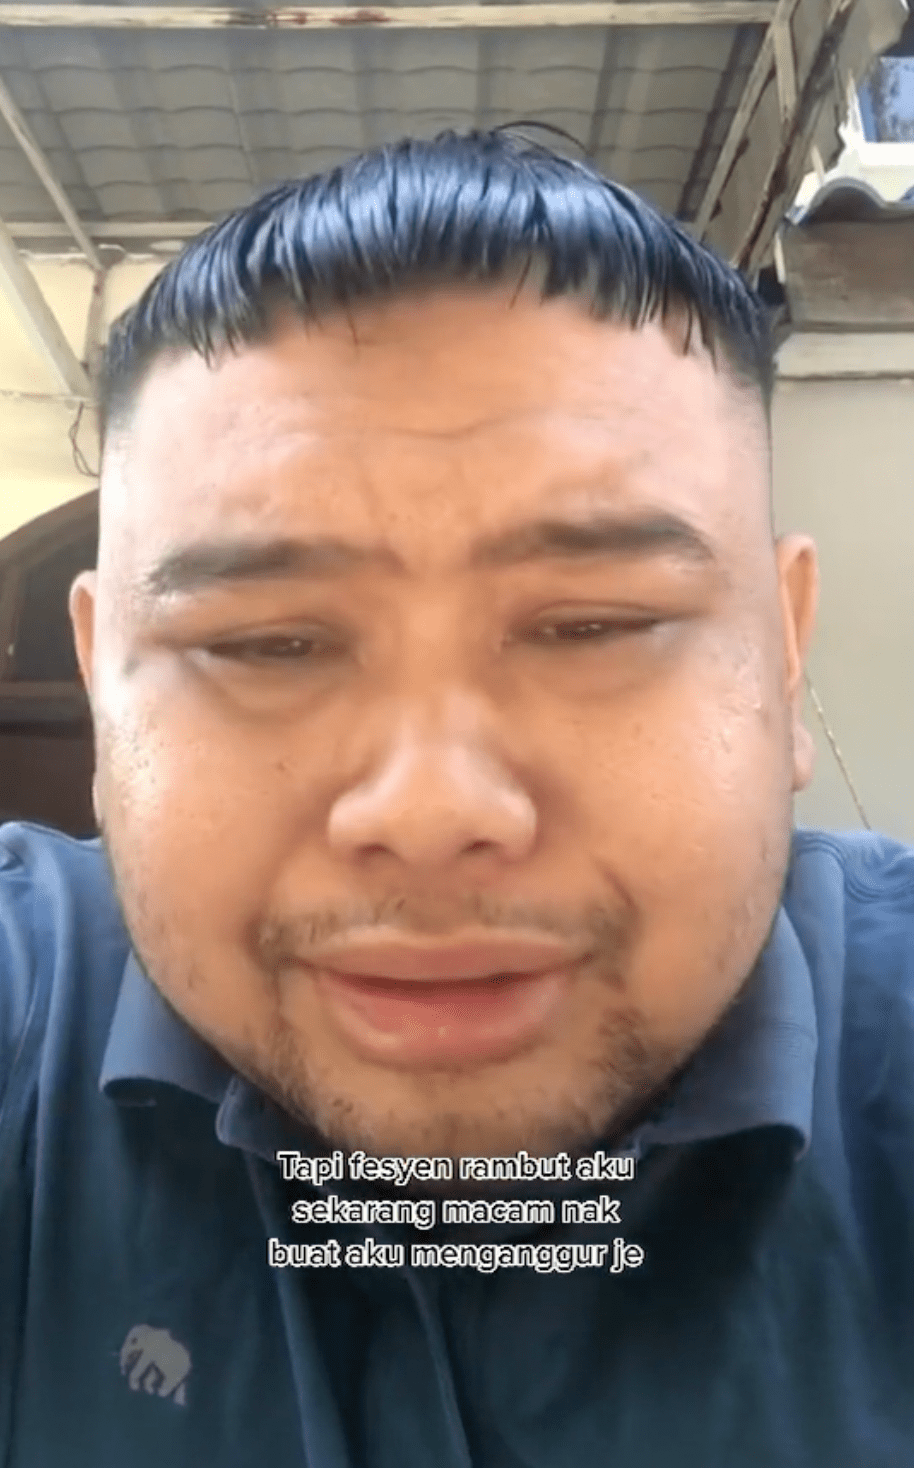 Malaysian kim jung un cuts his hair before interview 3. Png